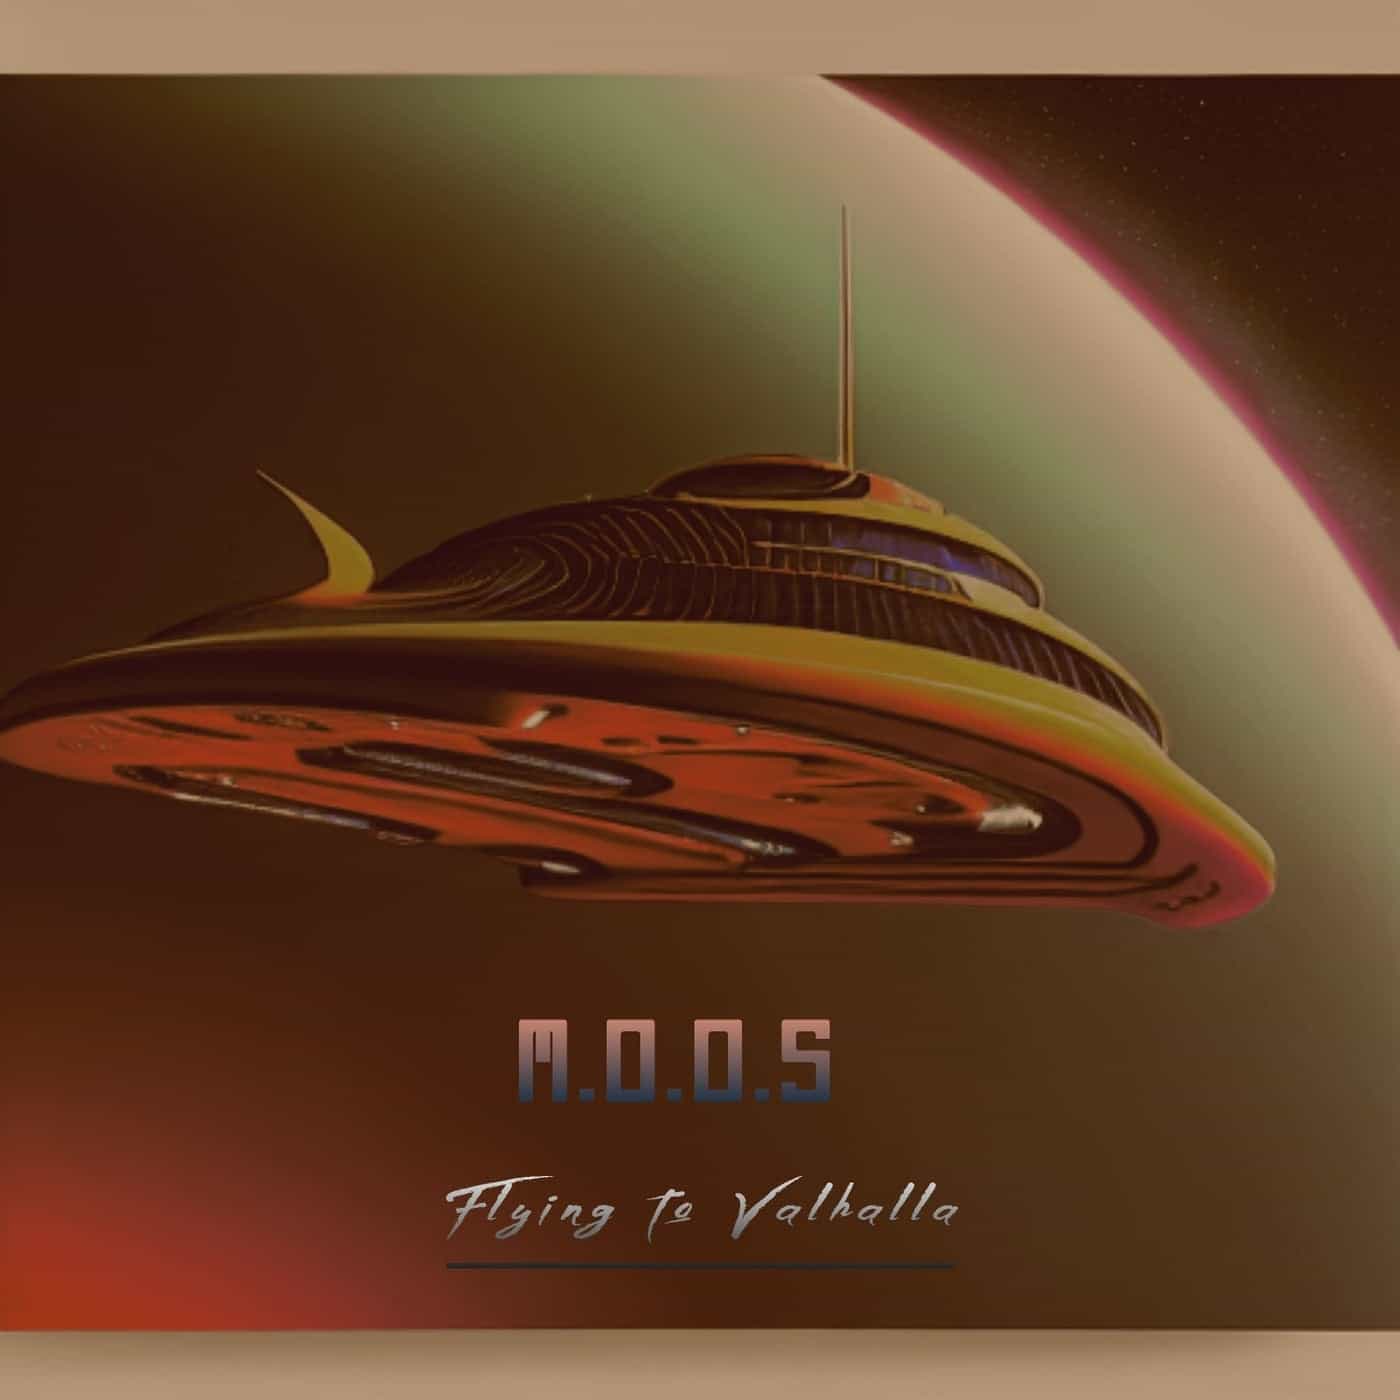 Download M.O.O.S - Flying to Valhalla on Electrobuzz